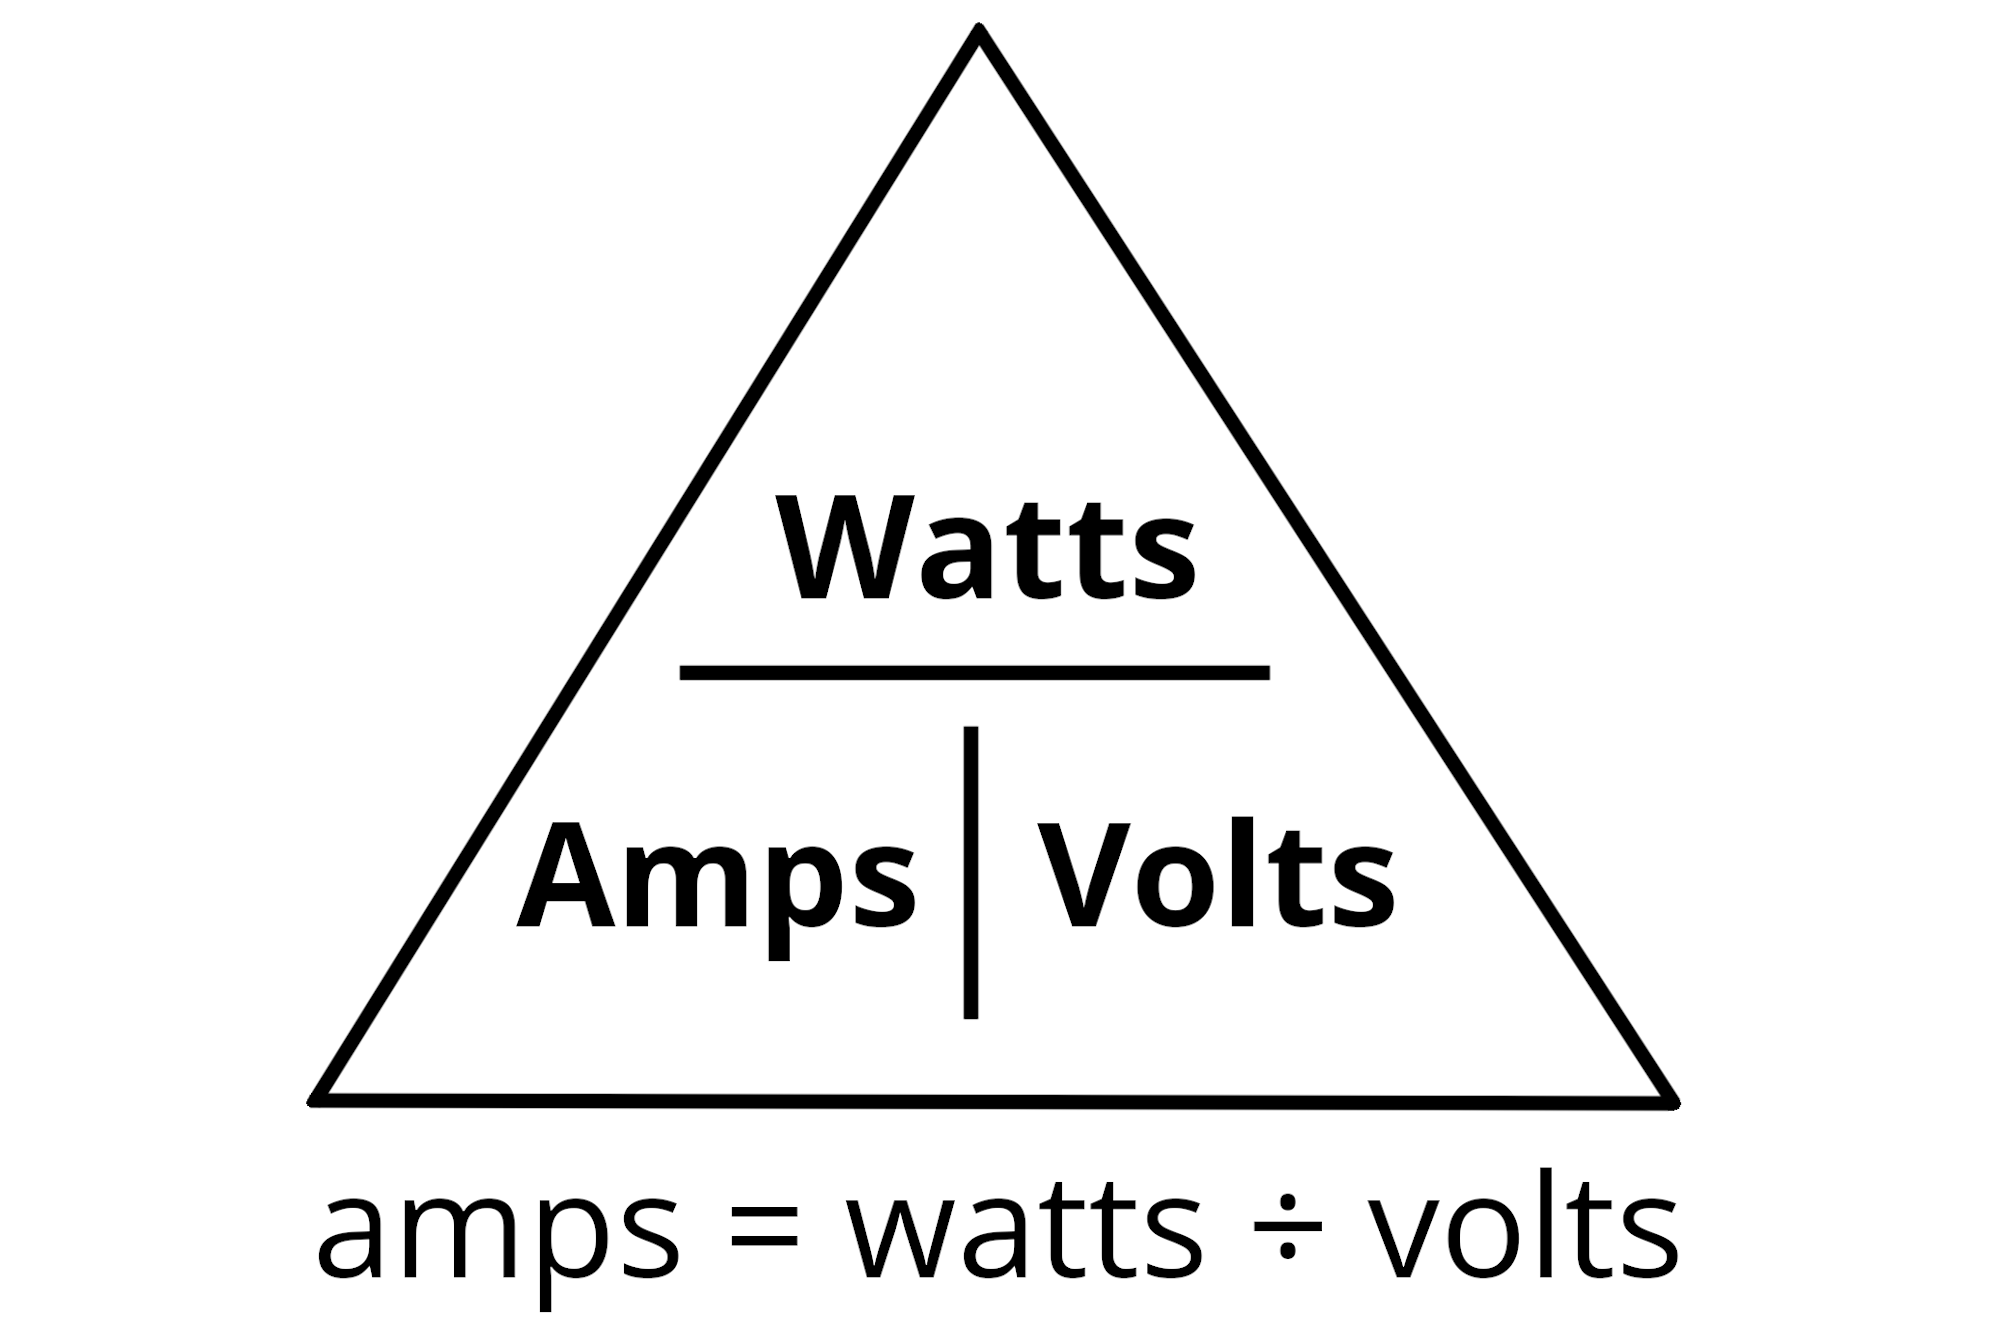 Power triangle illustrating the formula to convert volts to amps with amps being equal to watts divided by volts